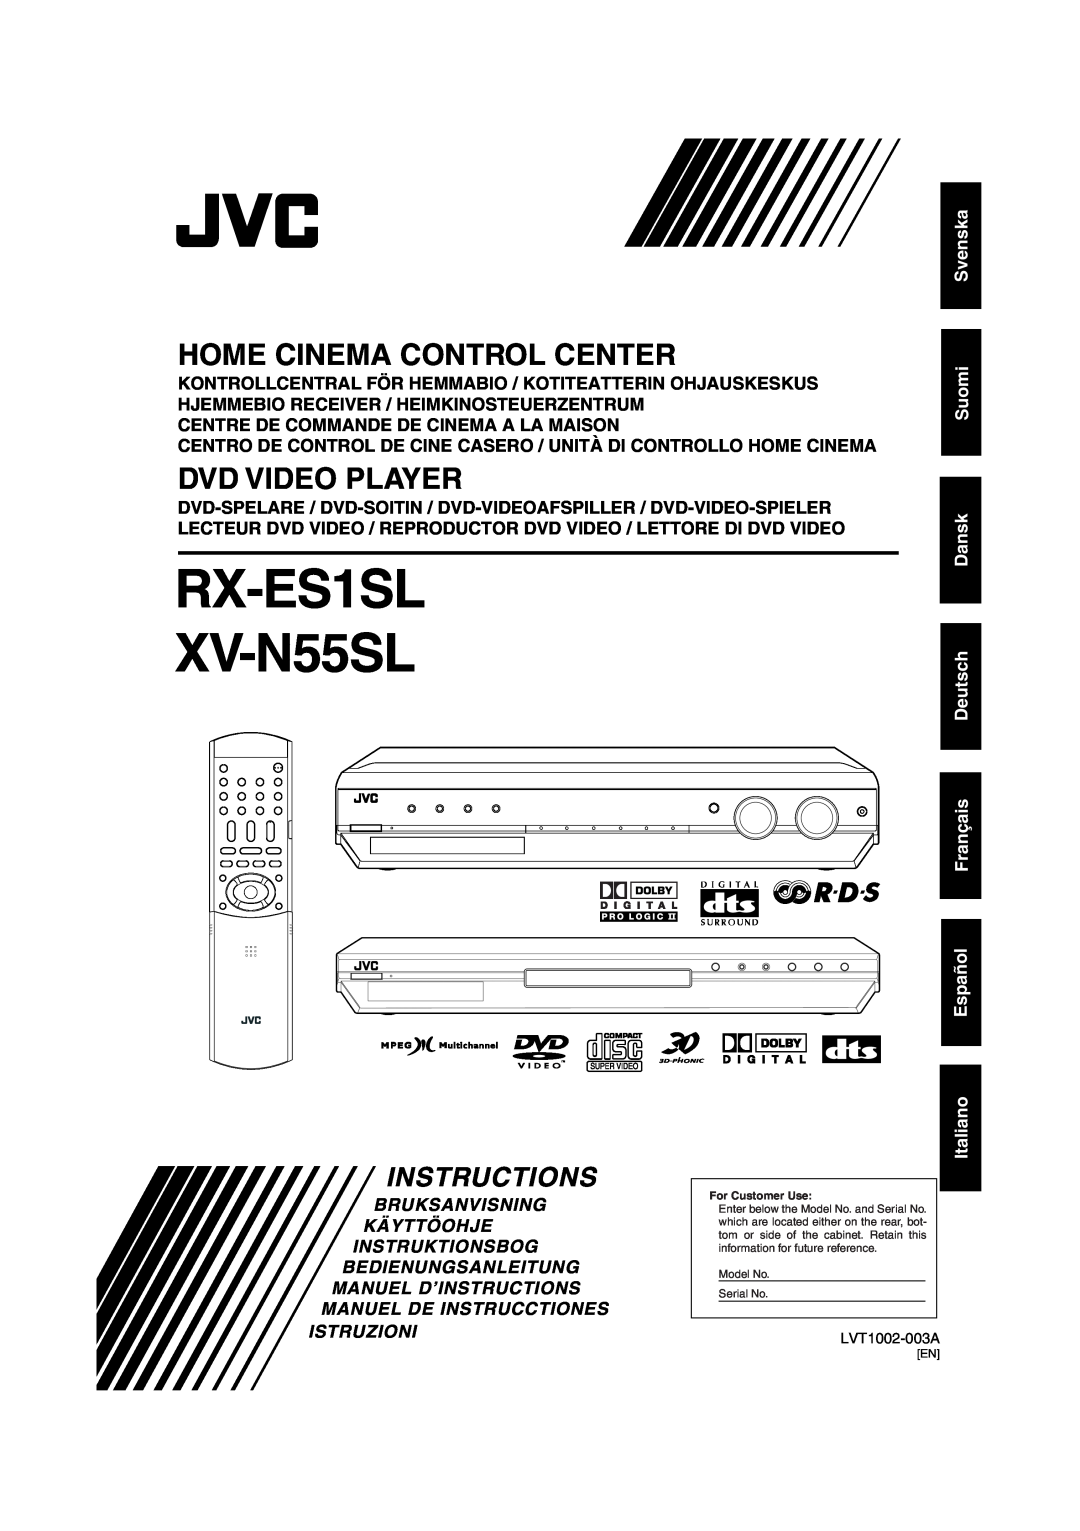 JVC RX-ES1SL manual Home Theater Receiver, Instructions, LVT1002-006A, For Customer Use, Model No Serial No 